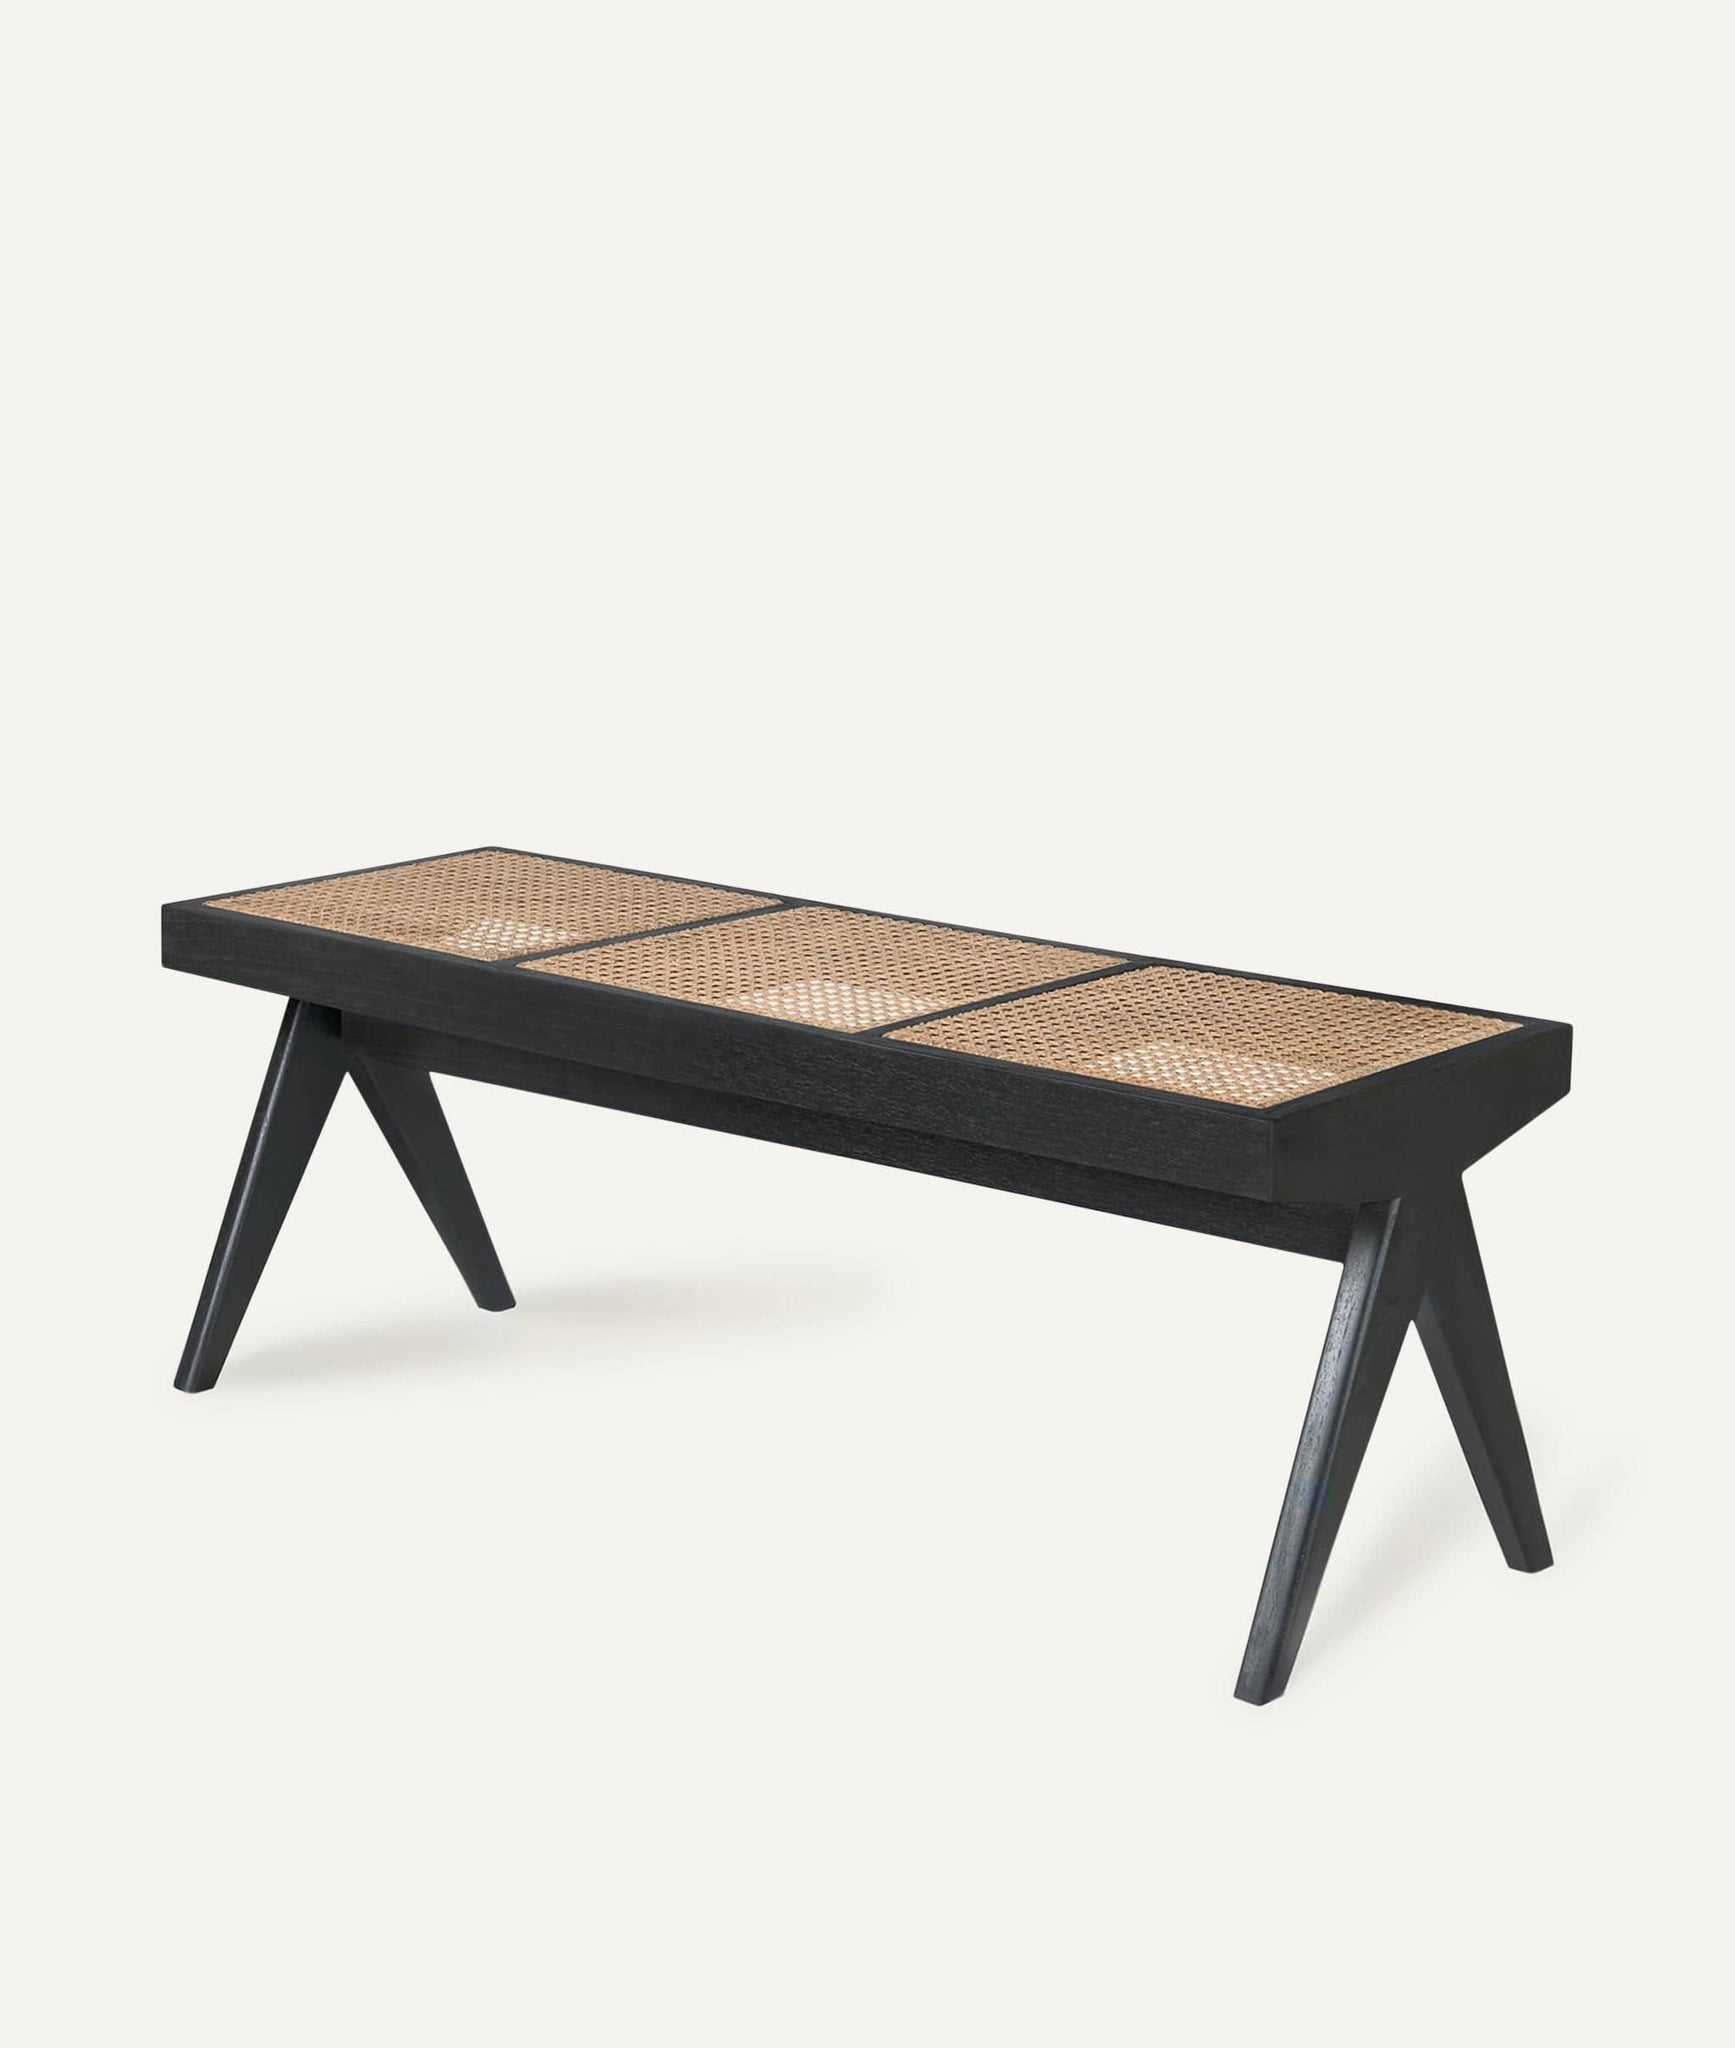 Three Seater Bench in Wood